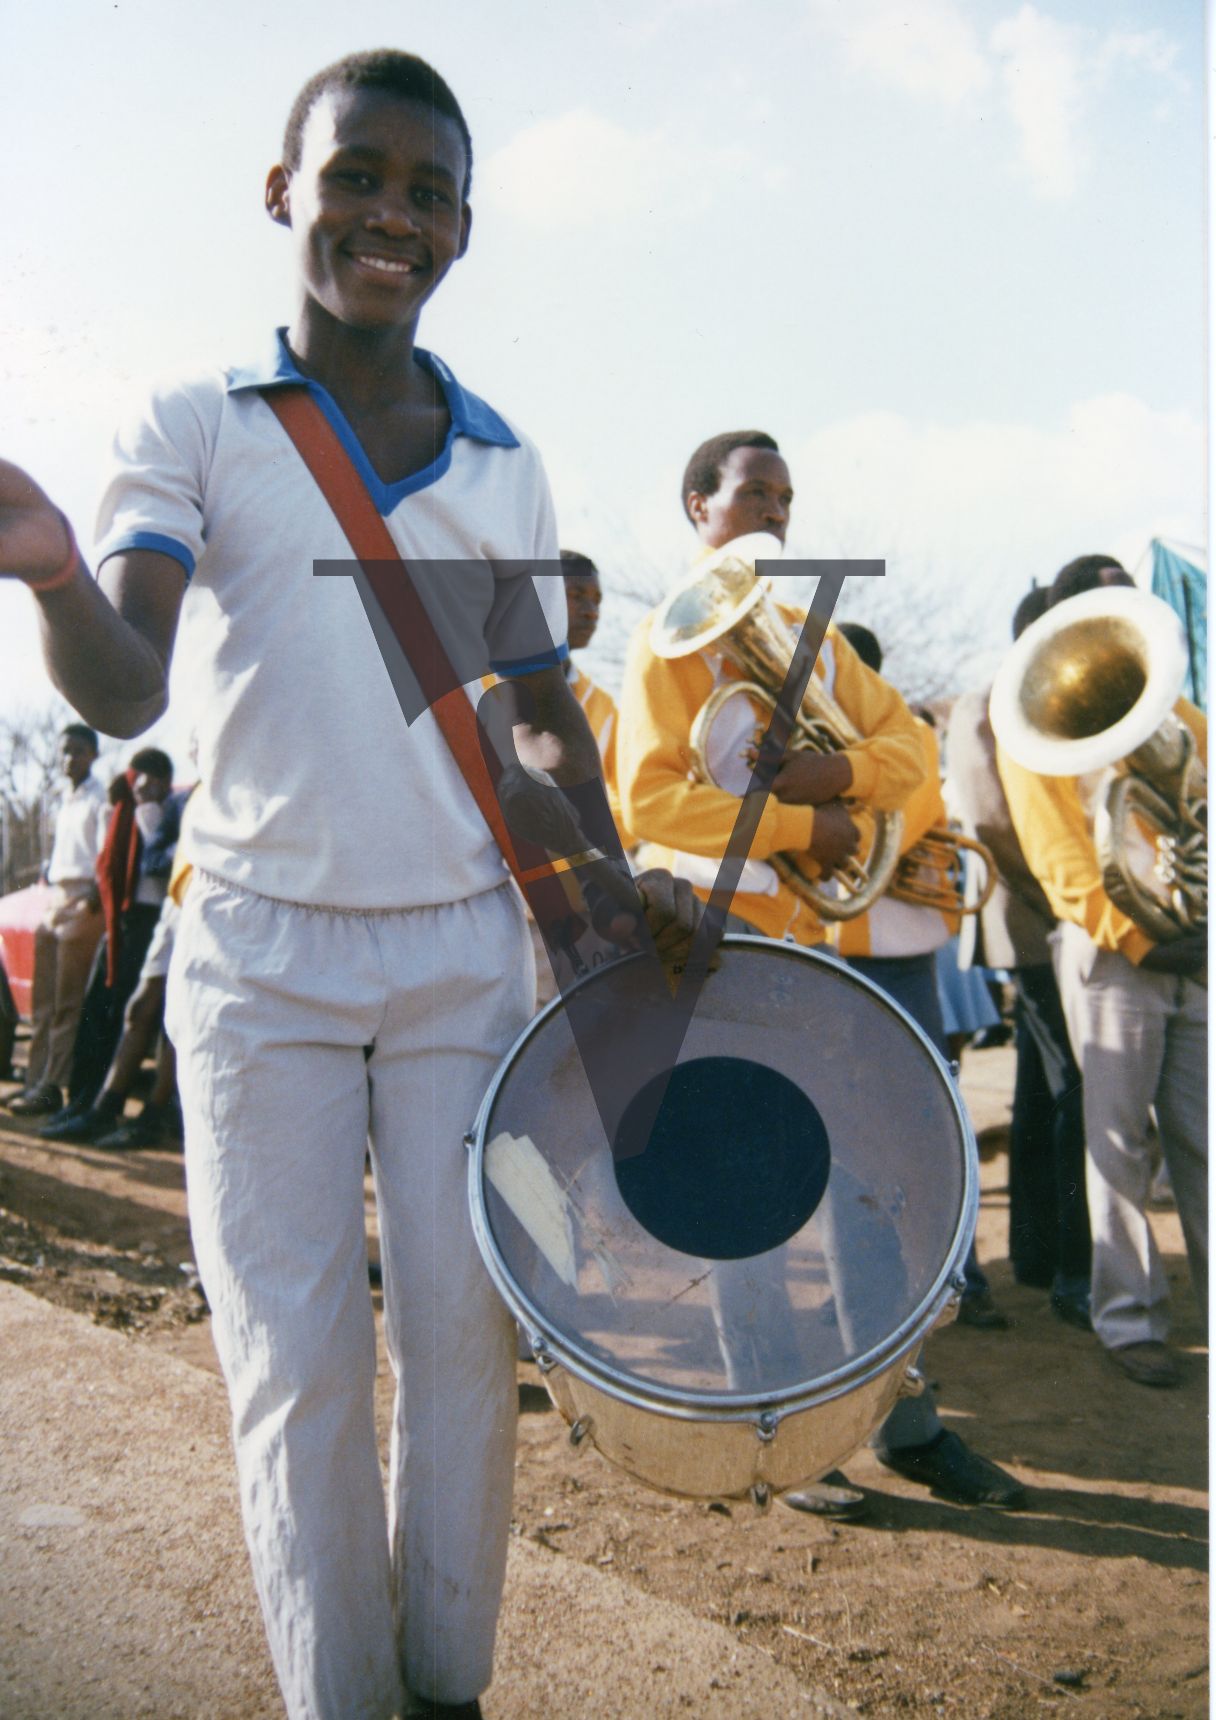 South Africa, marching band, drummer, boy, portrait, mid-shot.